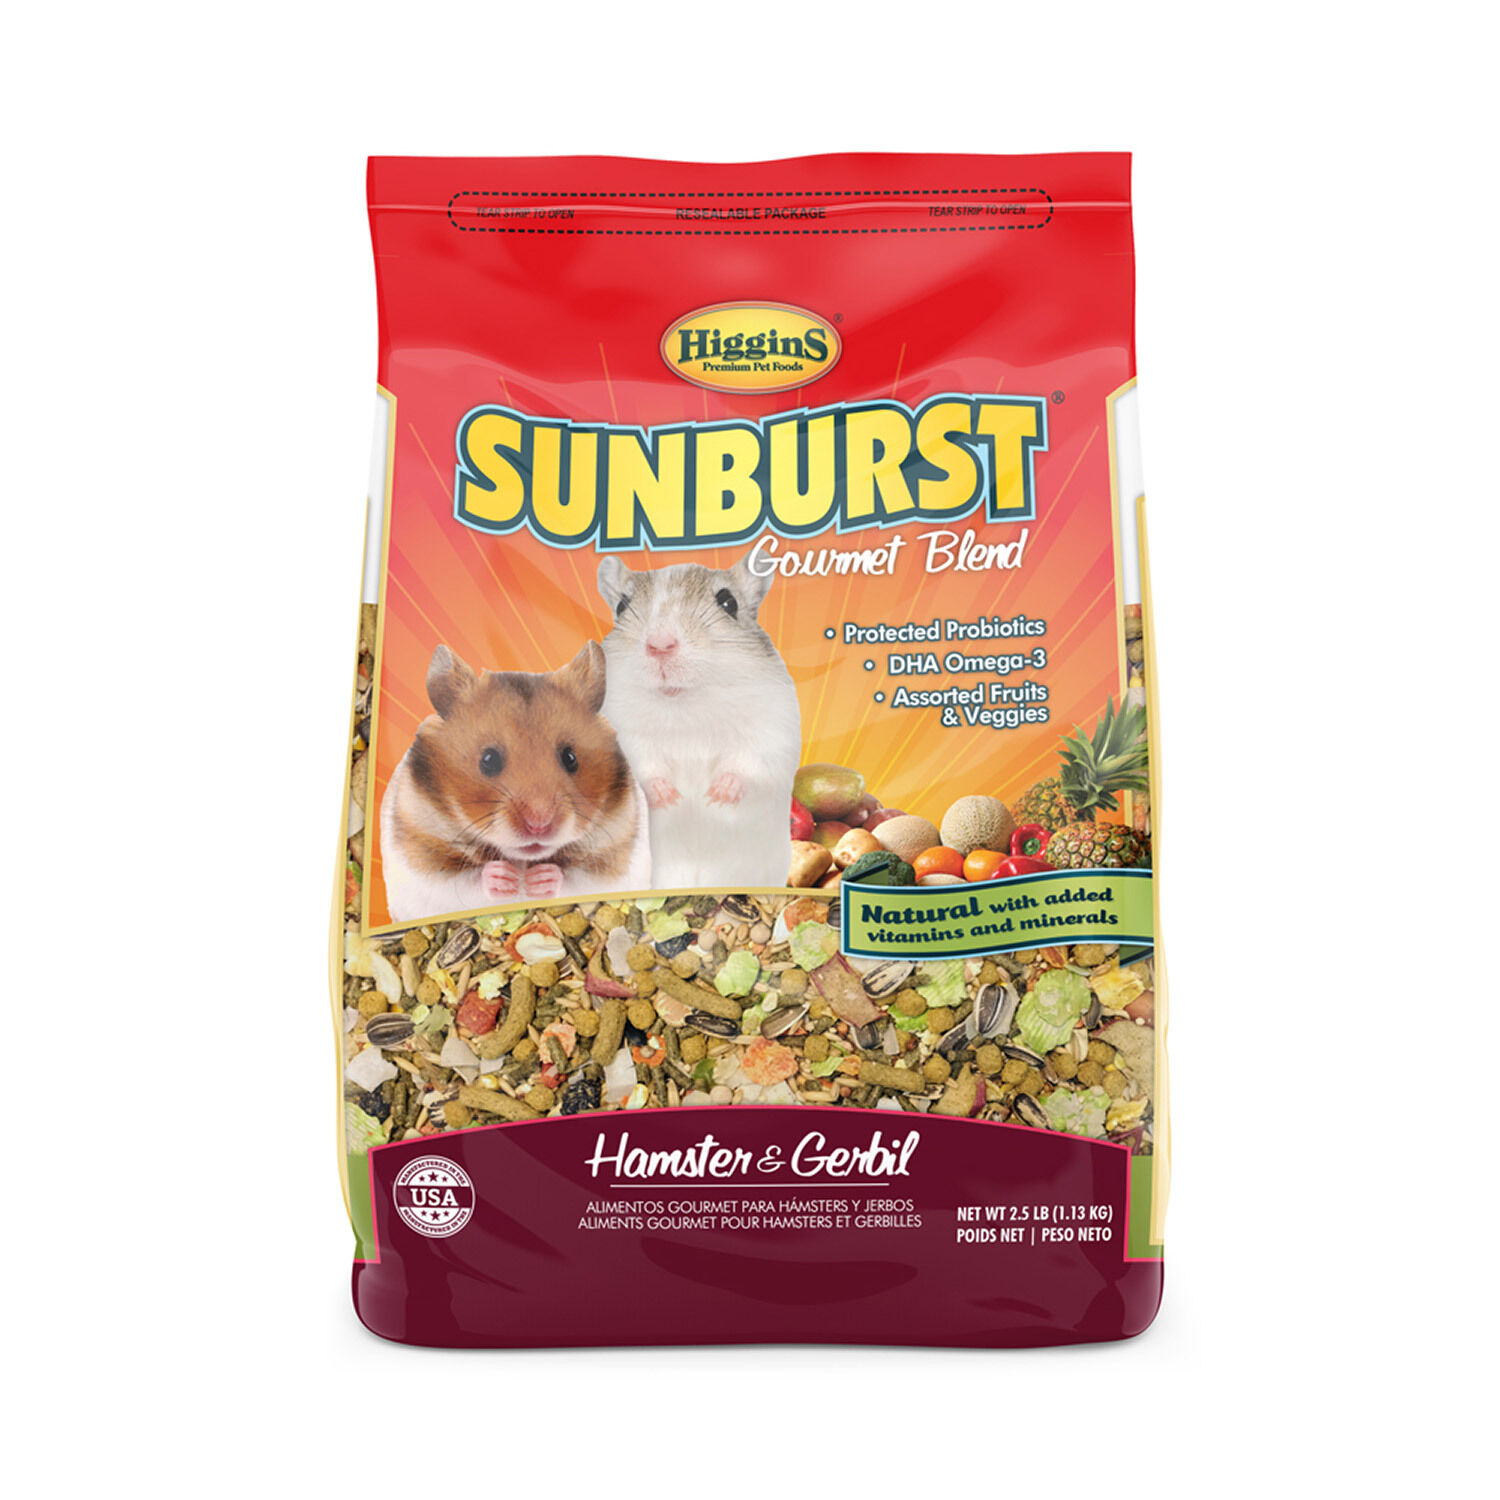 25% Off All Hamster and Gerbil Food and Treats